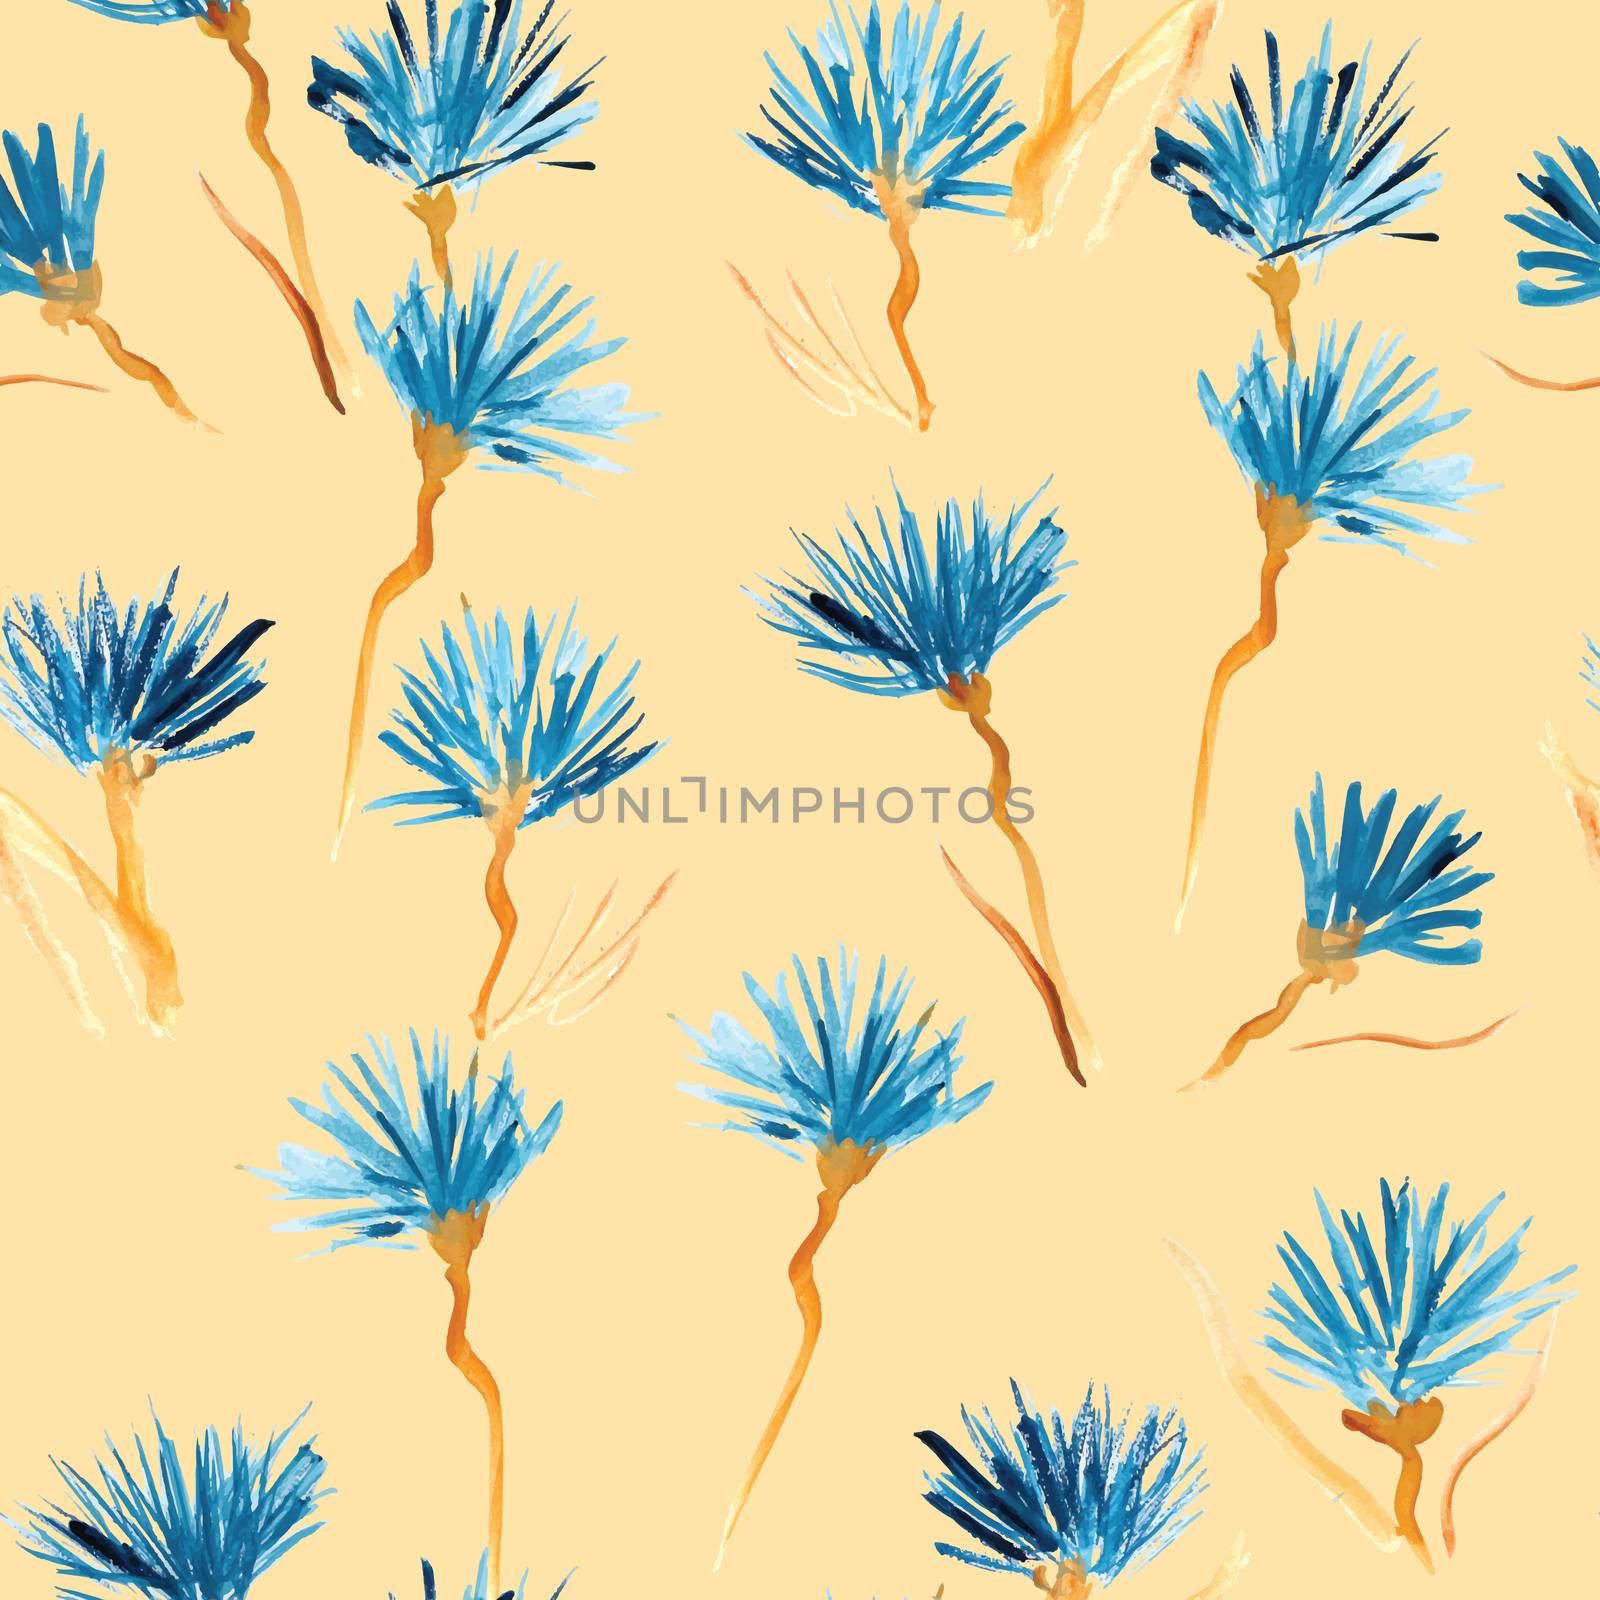 Retro background made of water colored flowers, Vintage hipster seamless pattern.